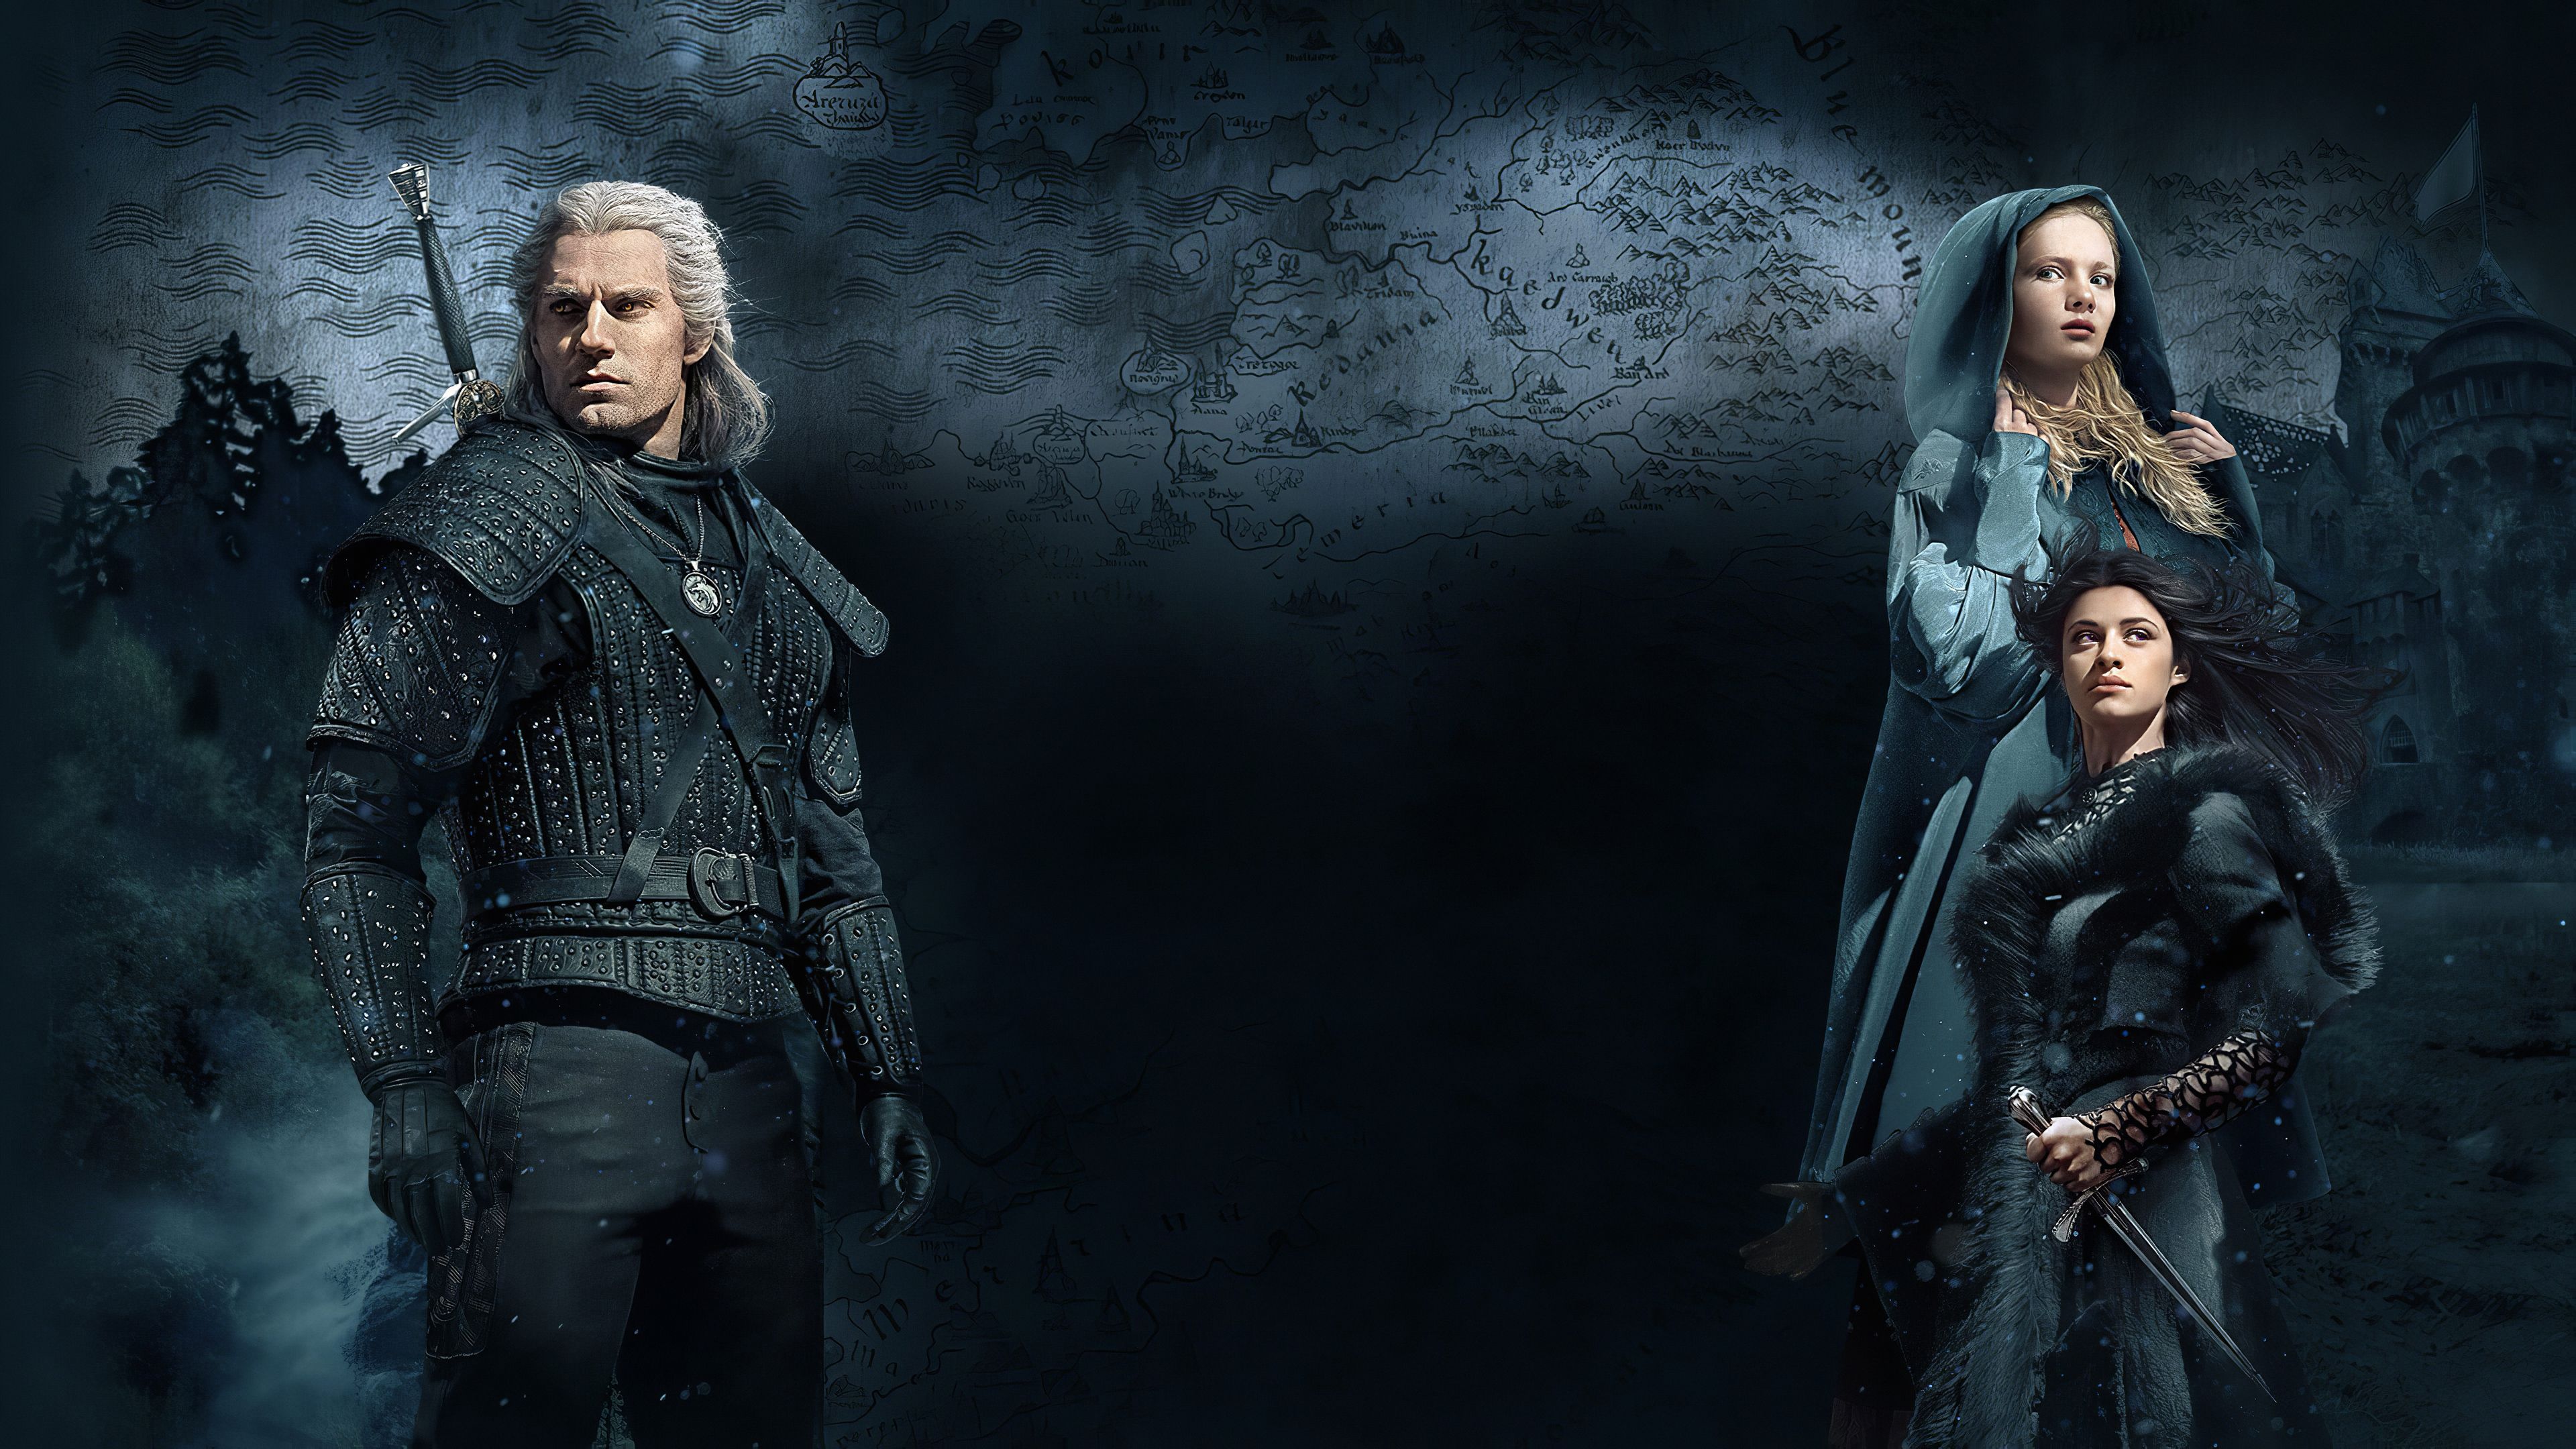 Wallpapers 4k The Witcher 2020 The Witcher Henry Cavill 4k 2020